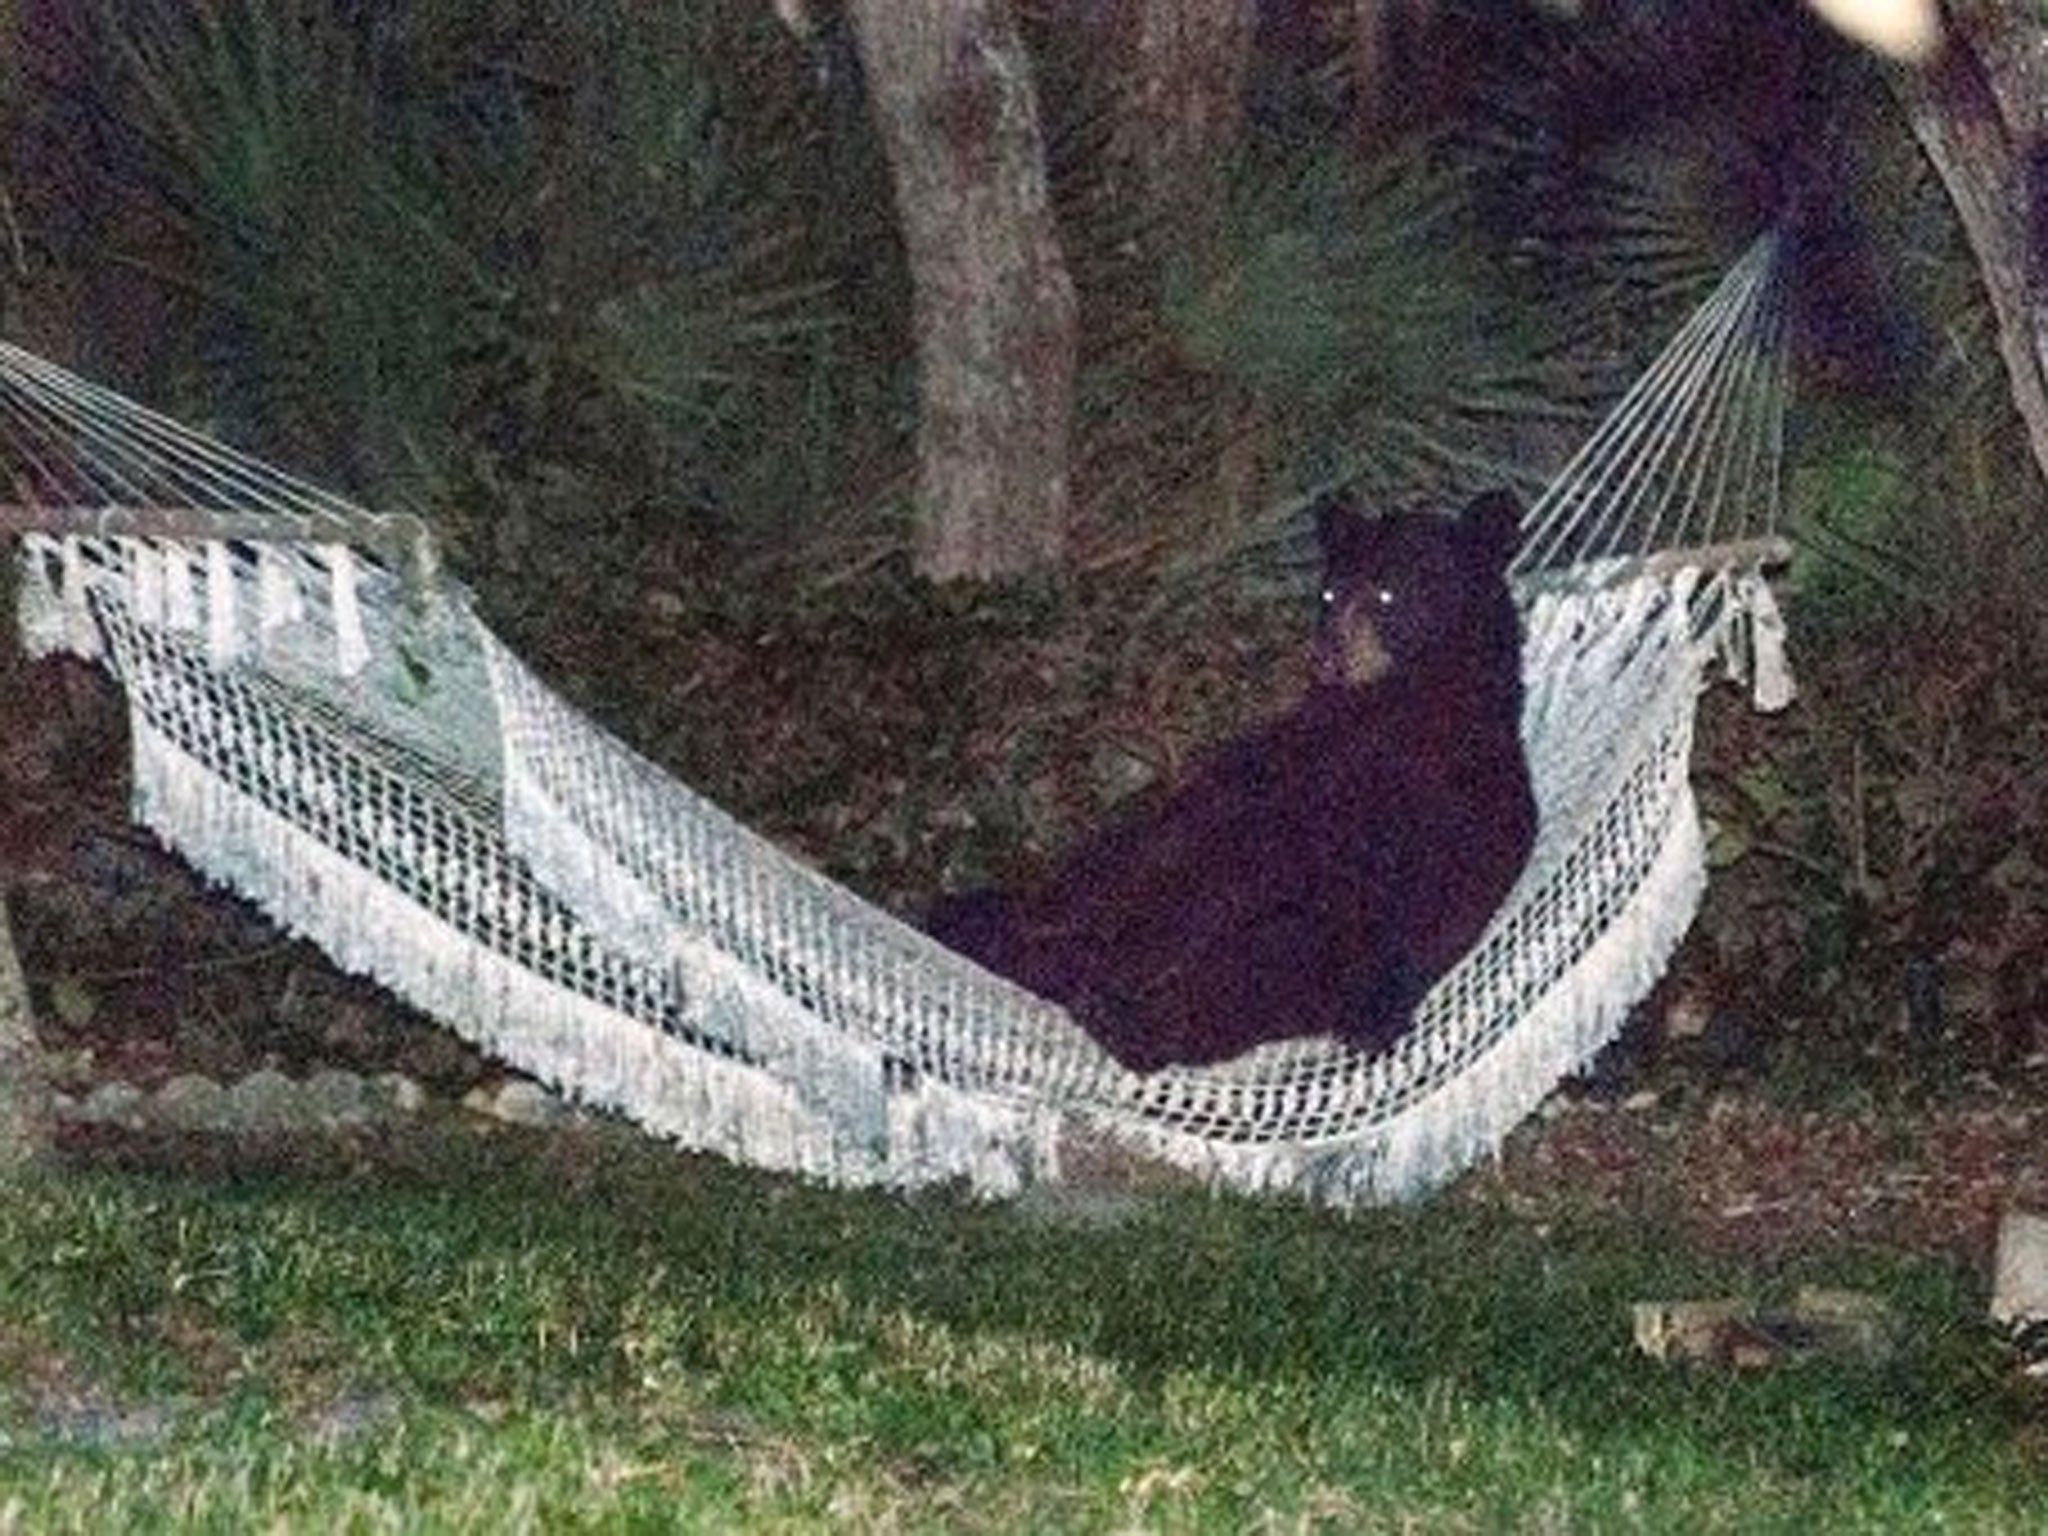 The black bear sat in the hammock for around 20 minutes before wandering off in the area of Daytona Beach, Florida